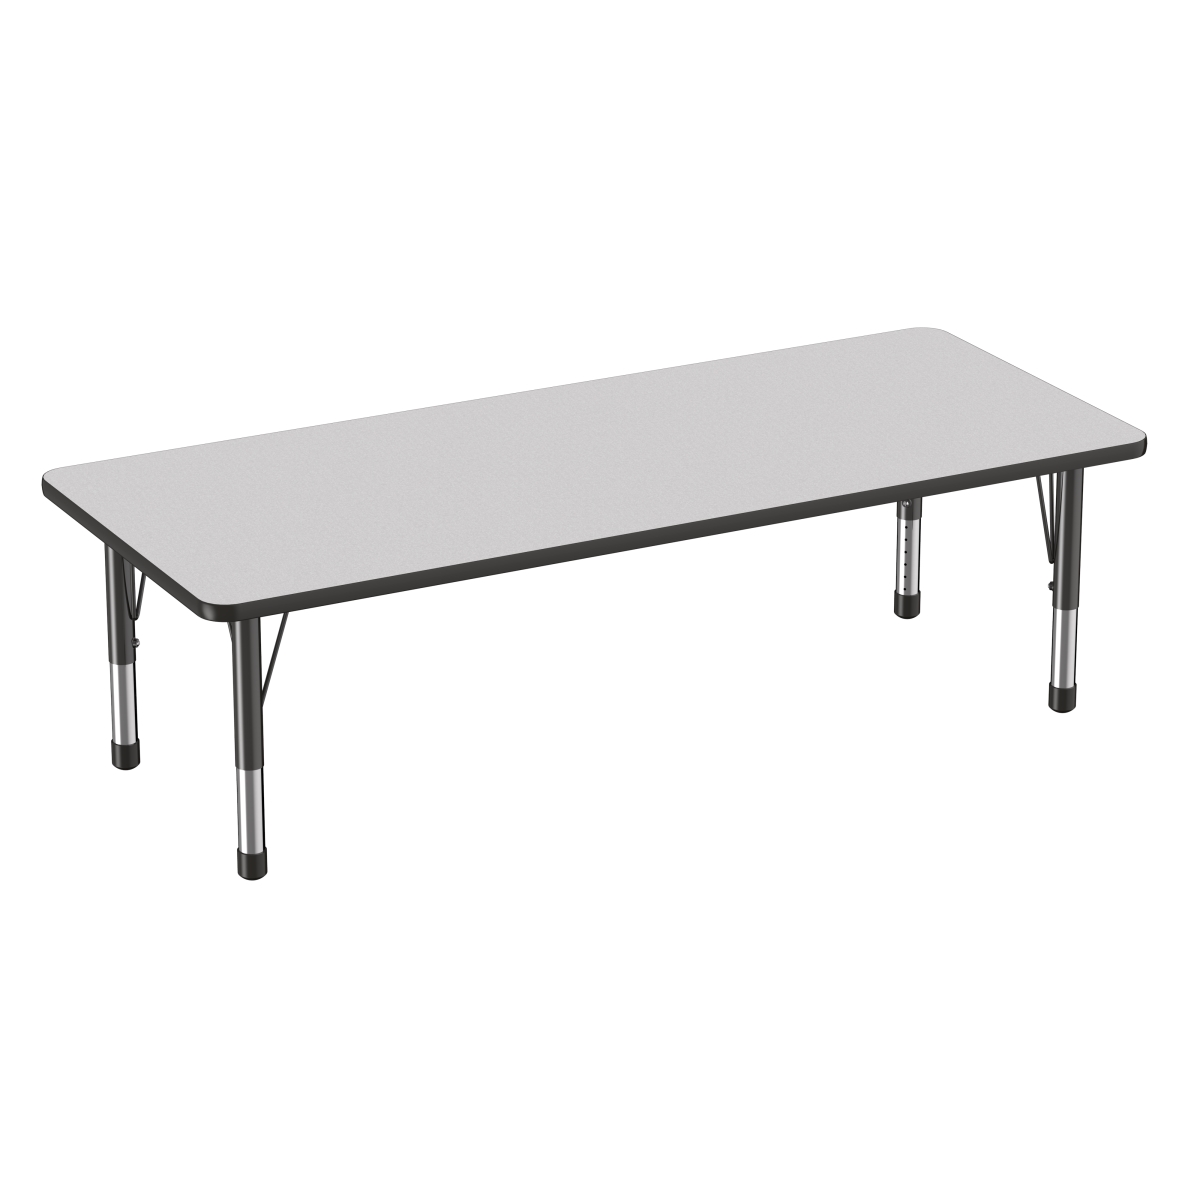 10029-gybk 30 X 72 In. Rectangle T-mold Adjustable Activity Table With Chunky Leg - Grey & Black